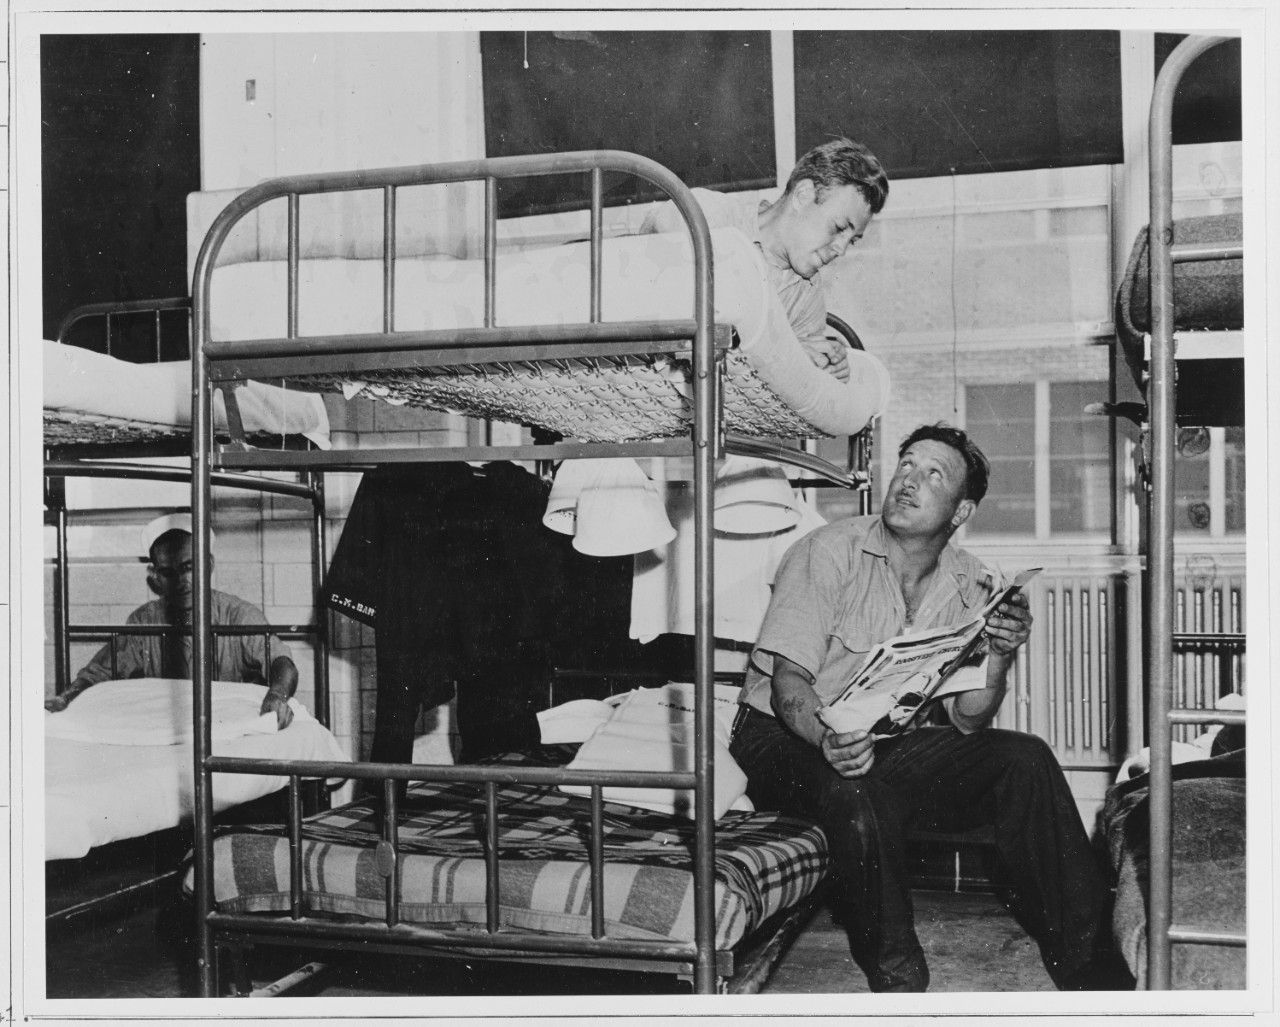 Enlisted men relaxing in barracks at Naval Air Station, Quonset Point, Rhode Island